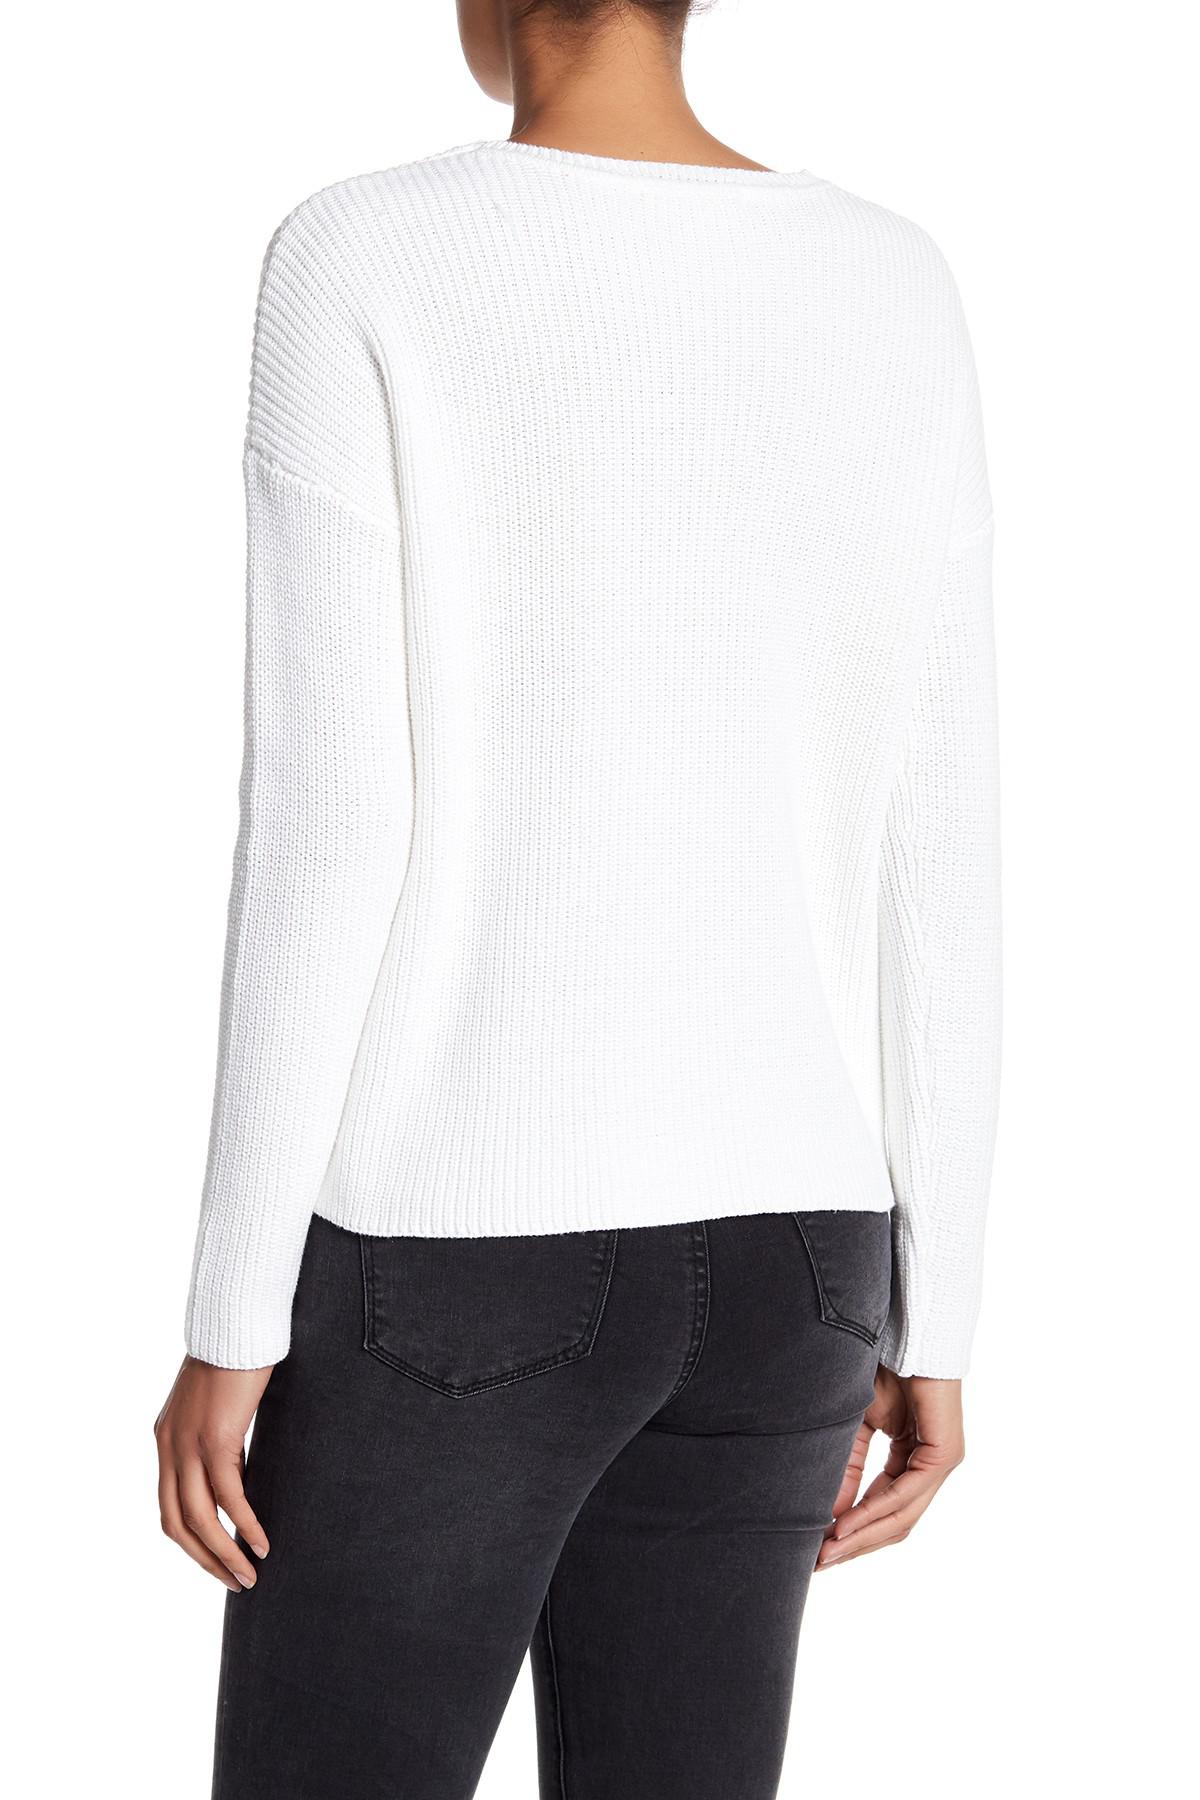 Lyst - Philosophy Apparel Crew Neck Pullover Sweater in White